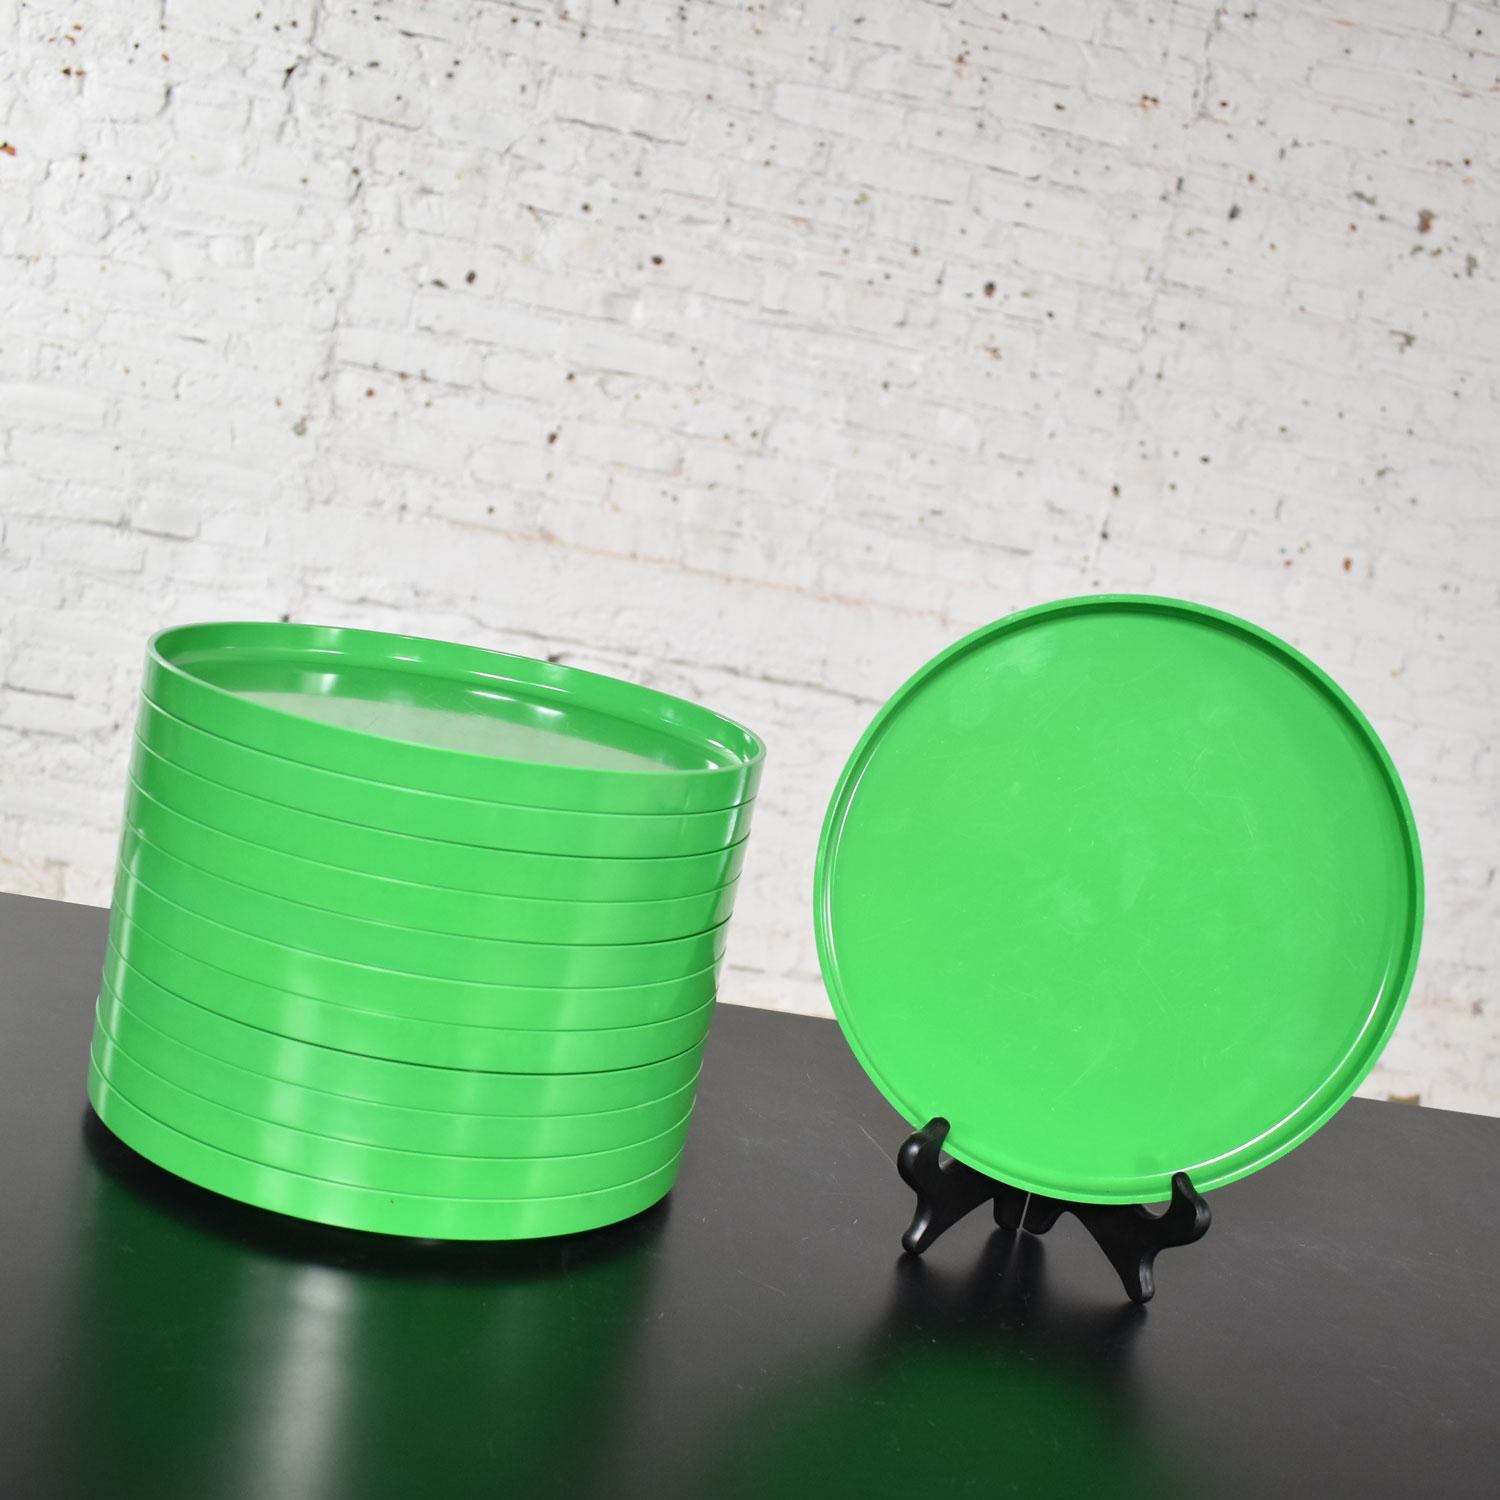 American Heller Dinnerware by Lella & Massimo Vignelli in Kelly Green 58 Pieces & Napkins